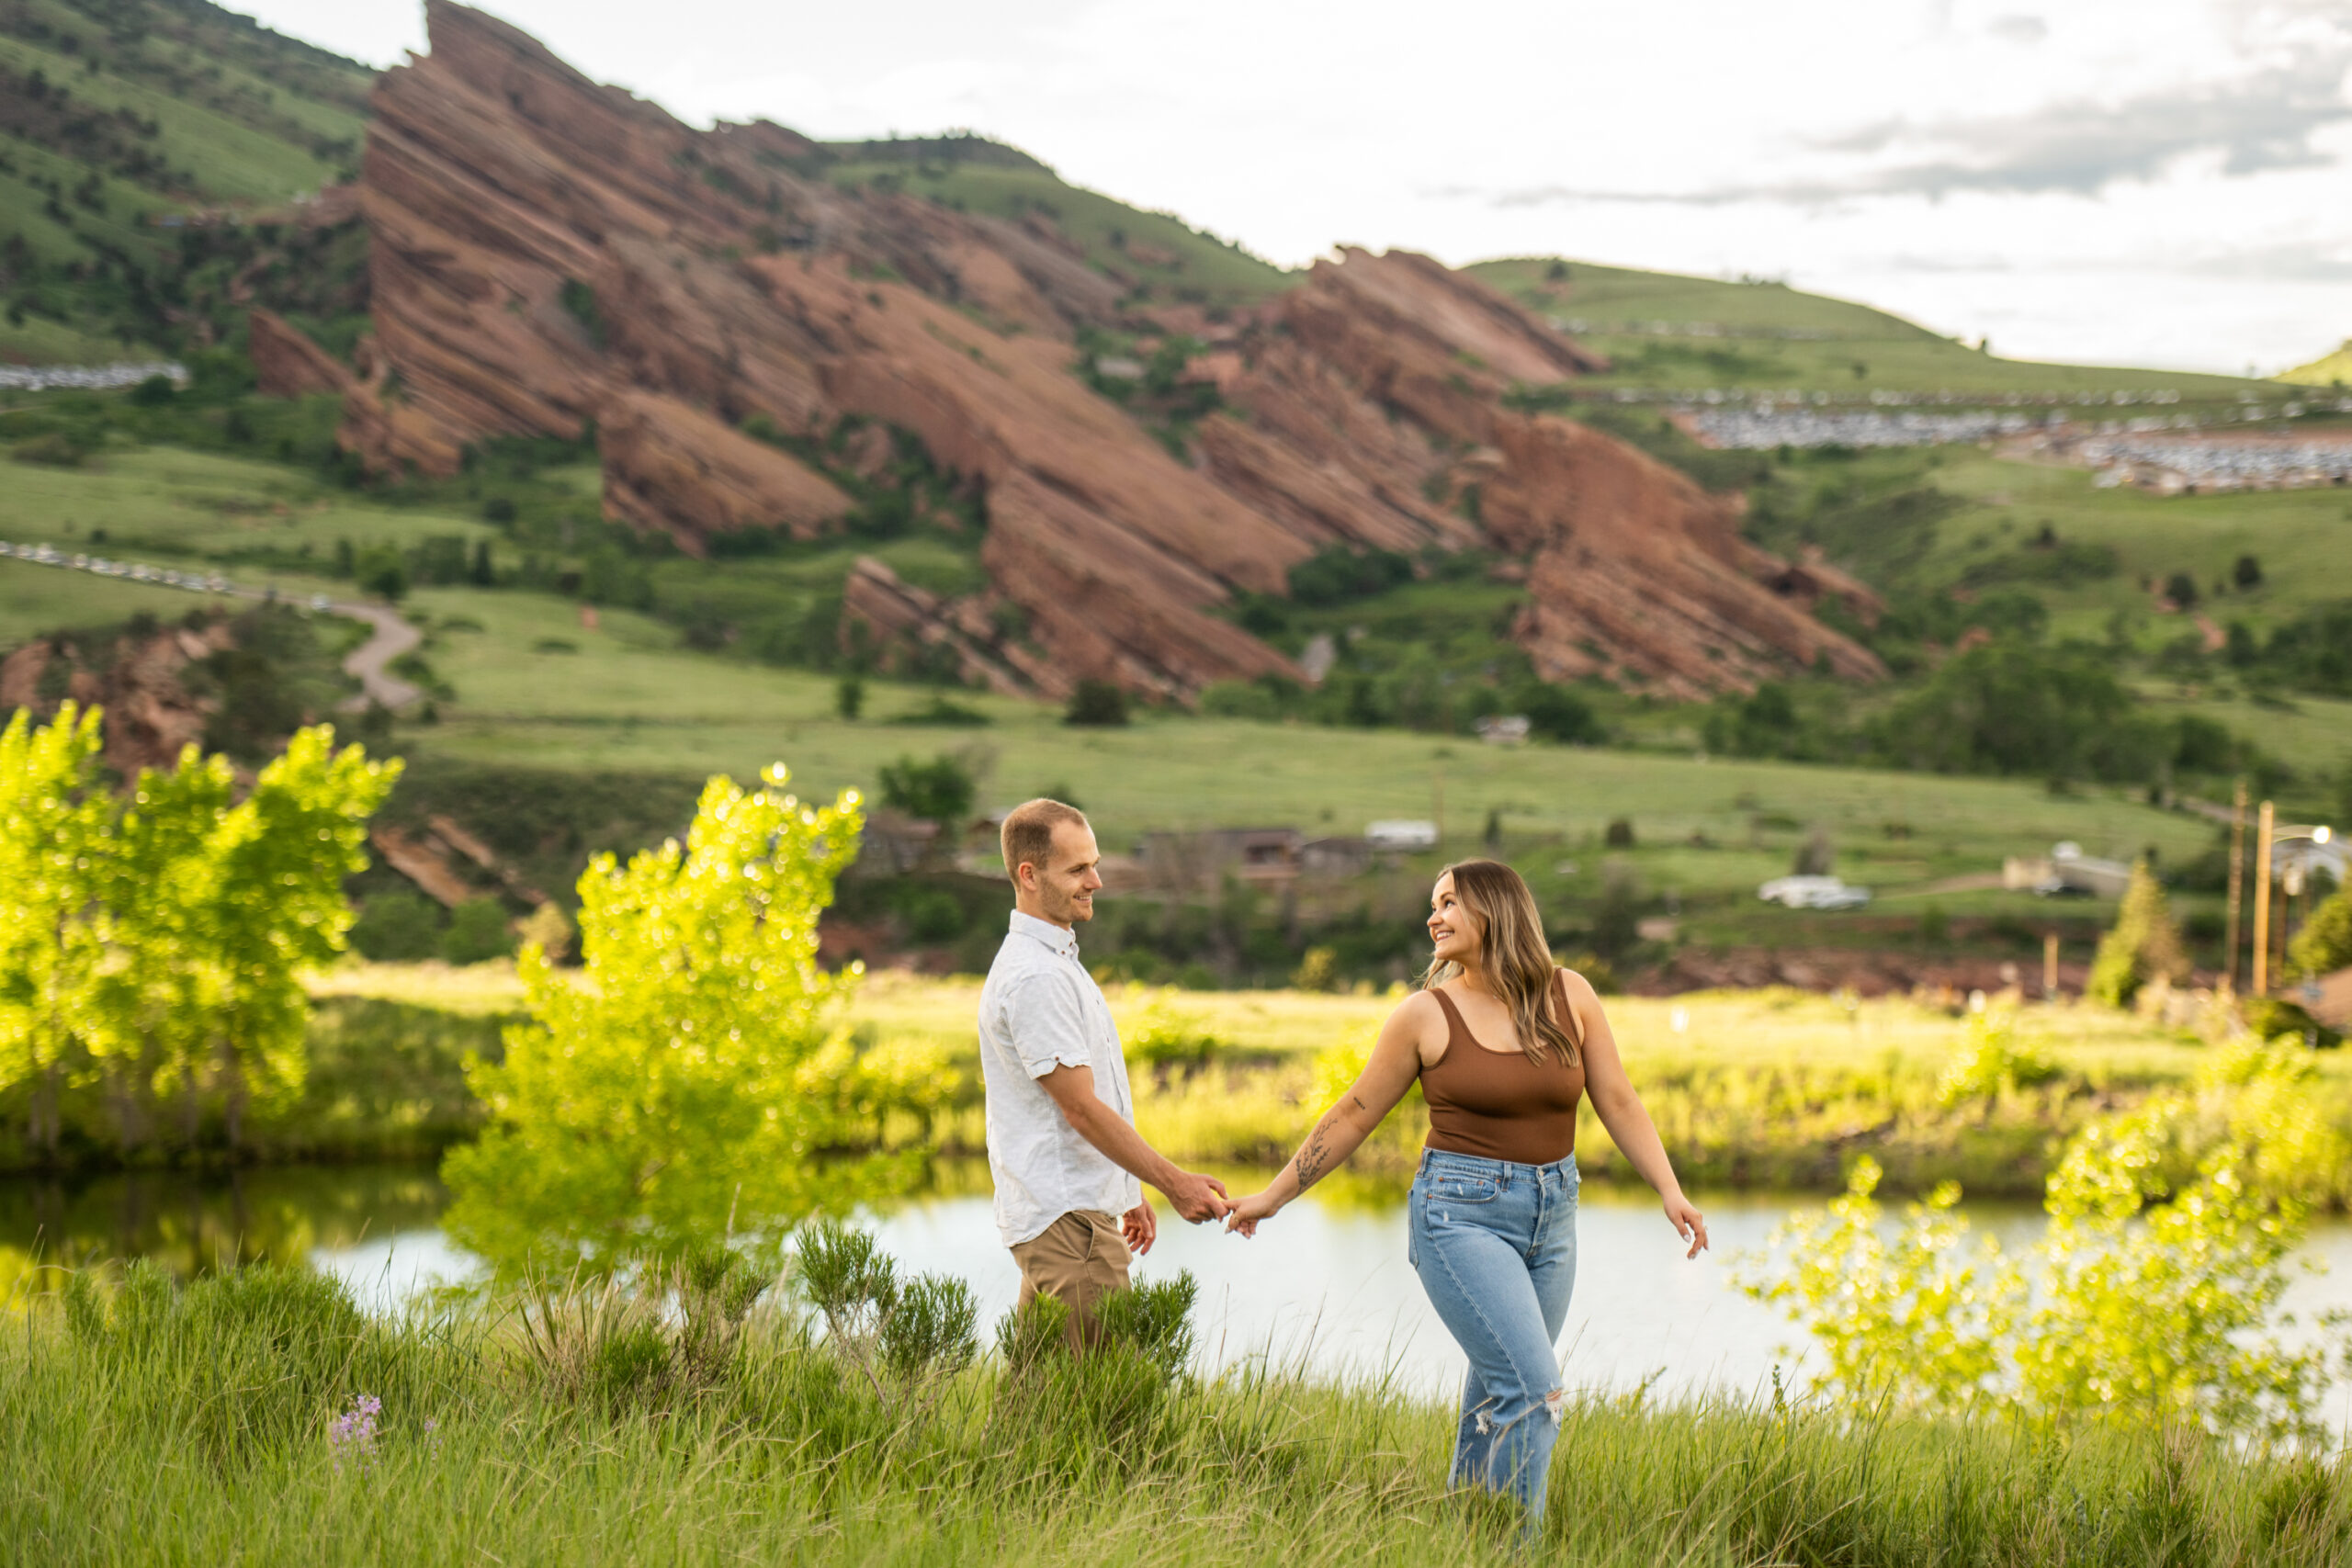 Ryan and Elizabeth walk hand-in-hand during a surprise proposal and engagement photos at Mt. Falcon Park East Trailhead near Denver, Colorado.